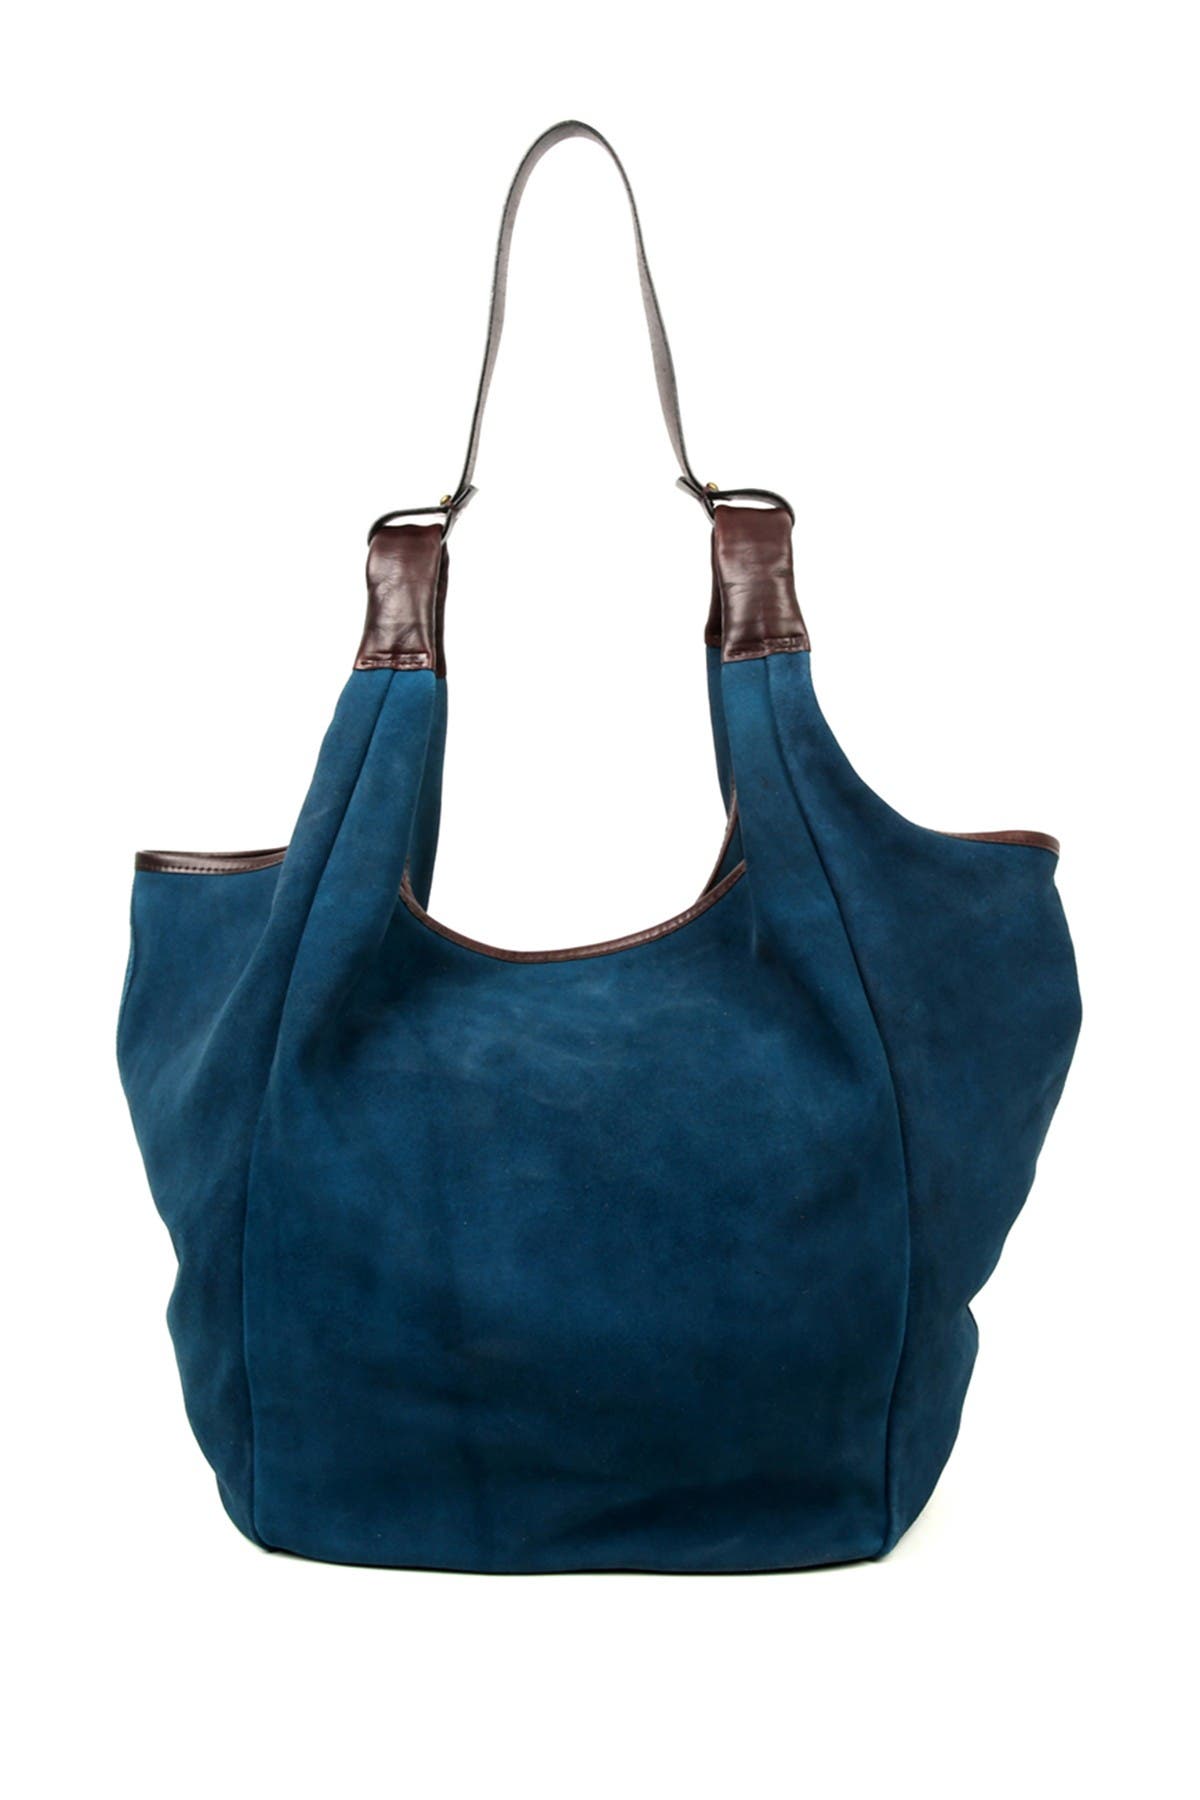 Old Trend Rose Valley Leather Hobo Bag In Navy